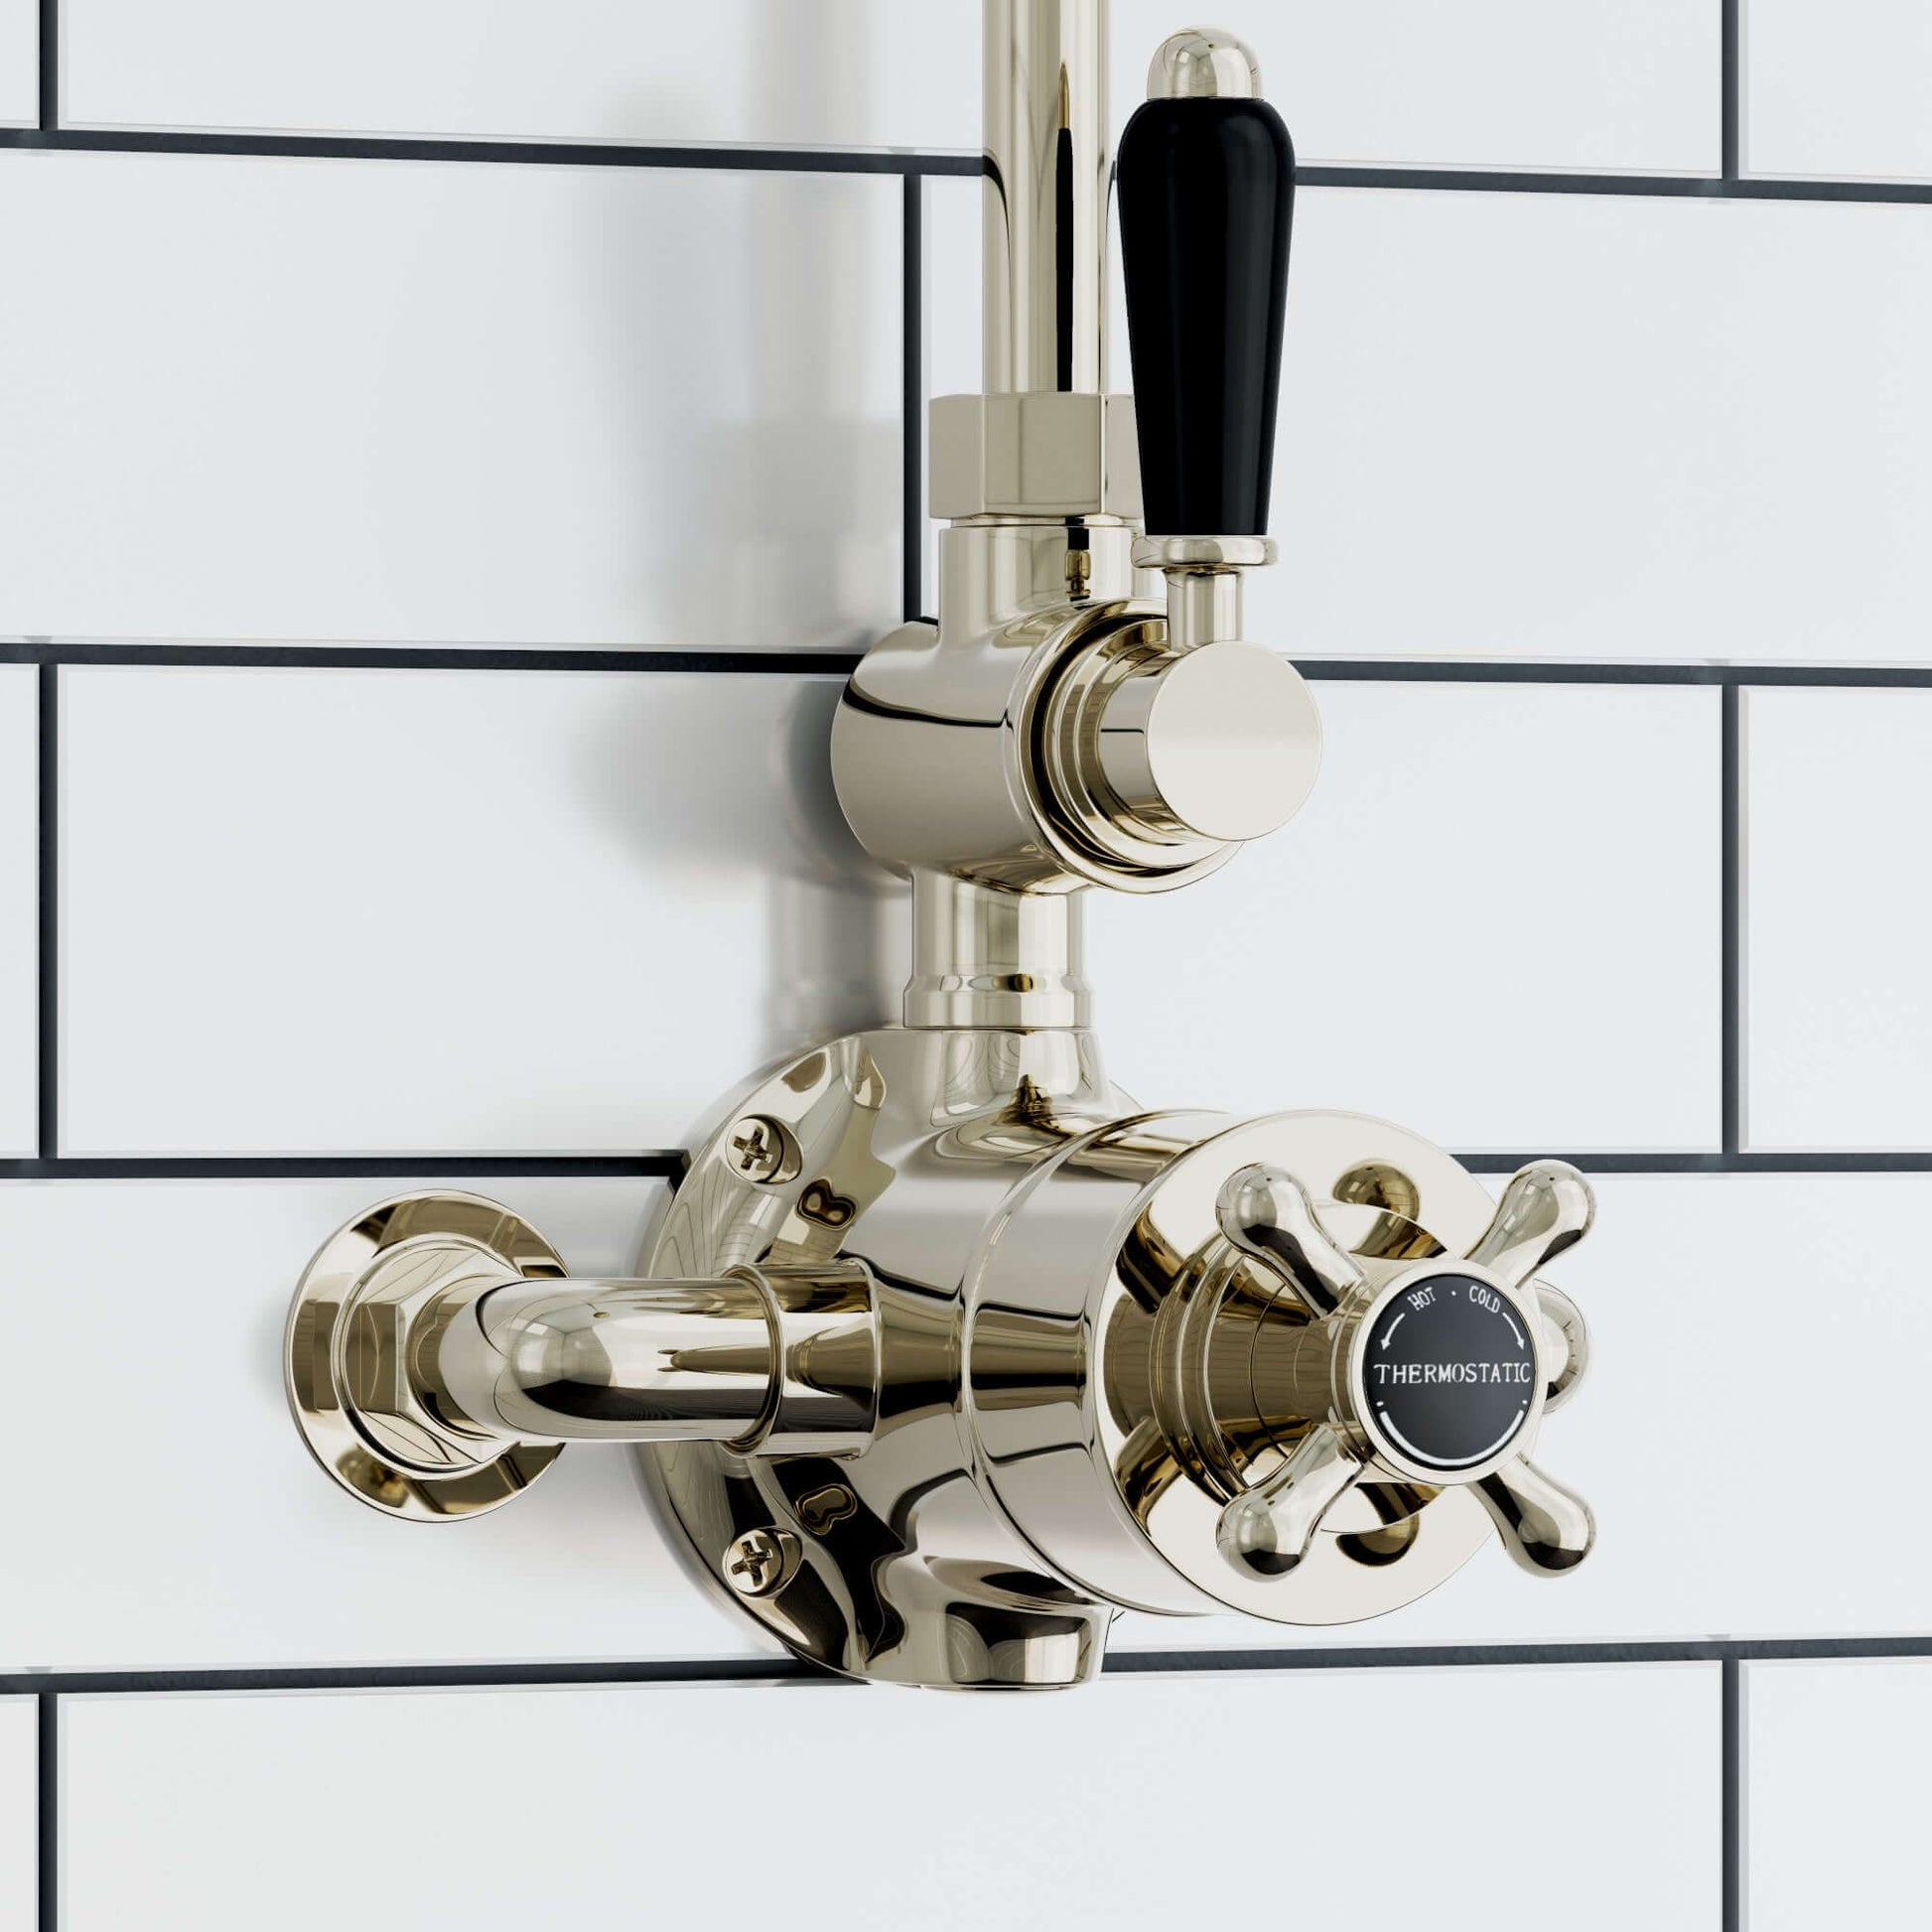 T90-01-downton-traditional-twin-thermostatic-shower-valve-top-outlet-gold-black-levers